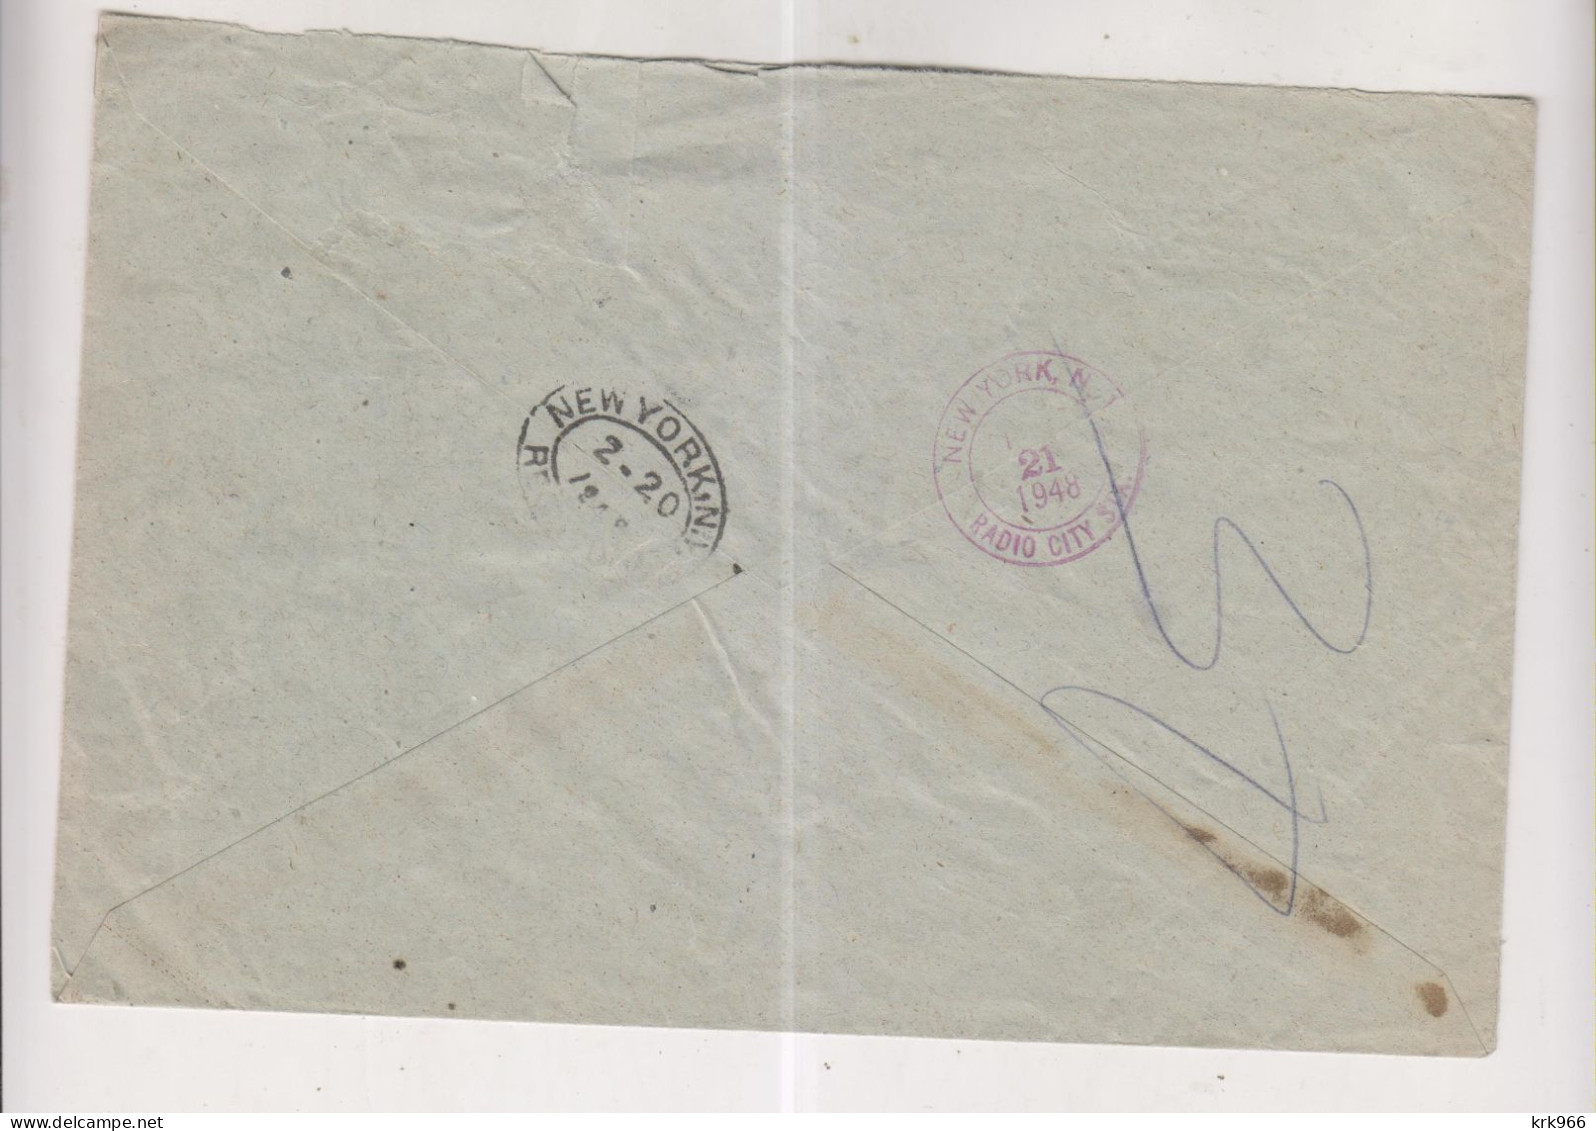 YUGOSLAVIA,1948 BEOGRAD Registered Airmail Cover To United States - Covers & Documents